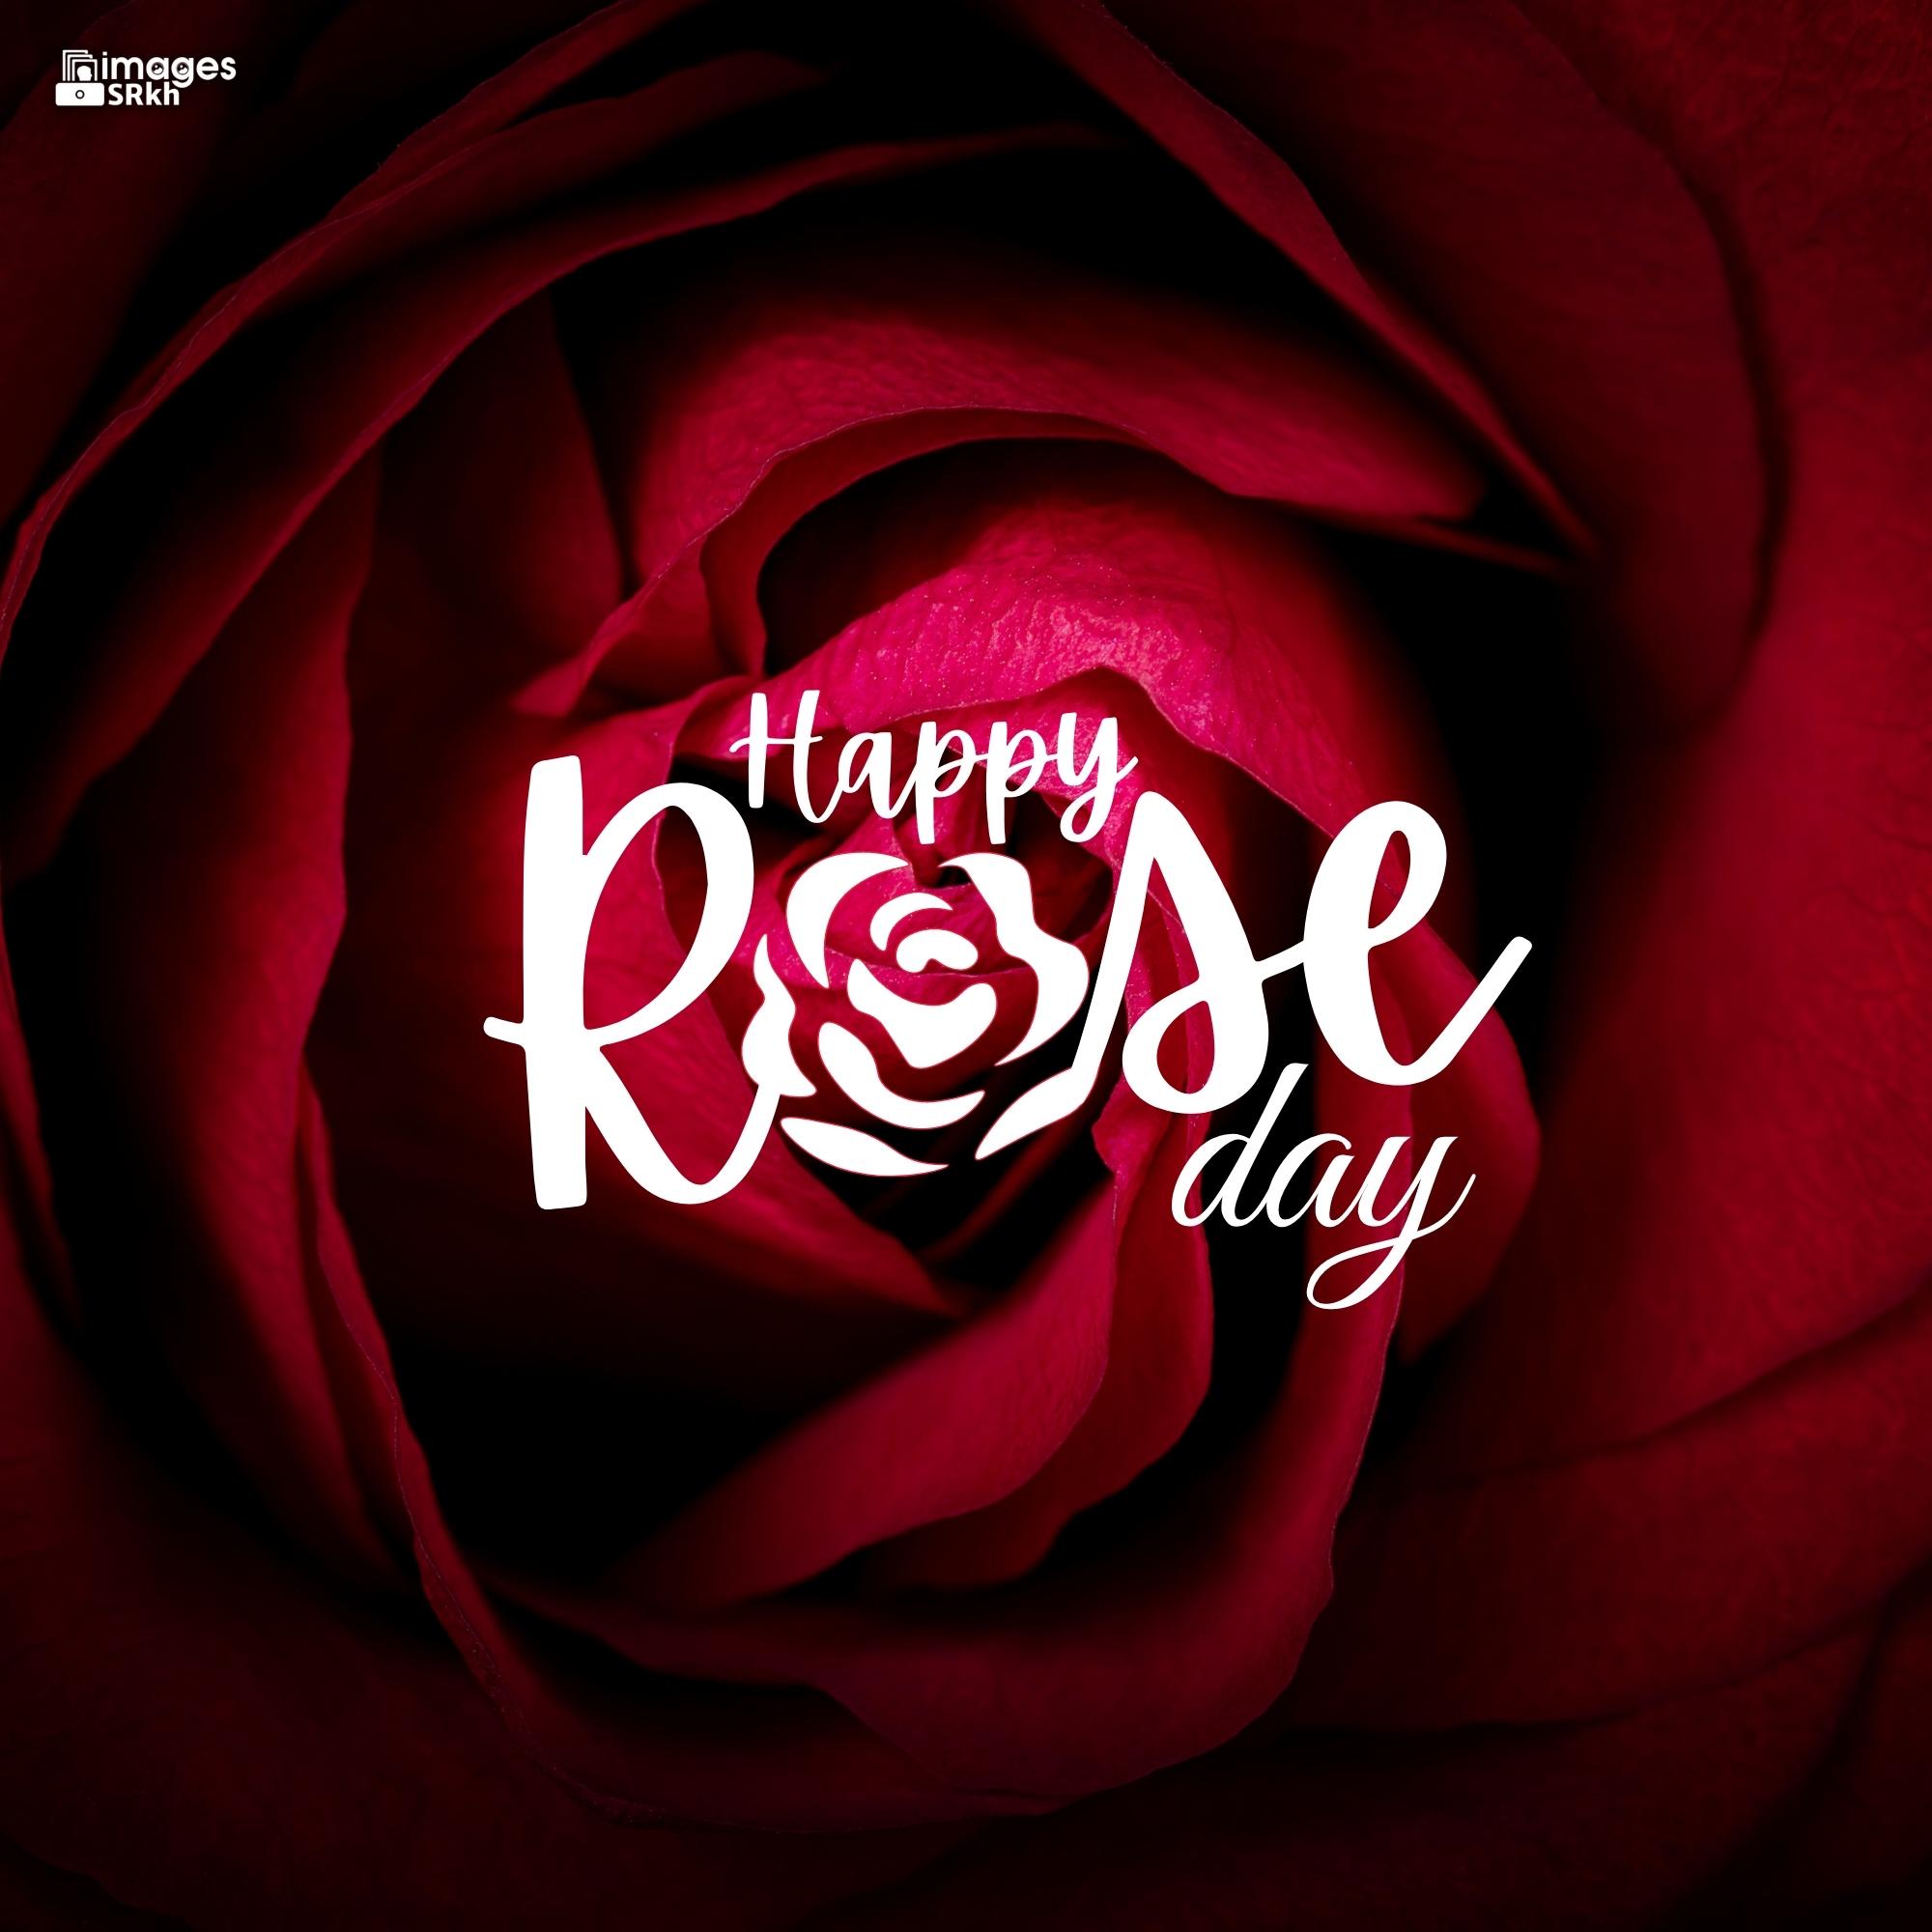 Happy Rose Day Image Hd Download (33)